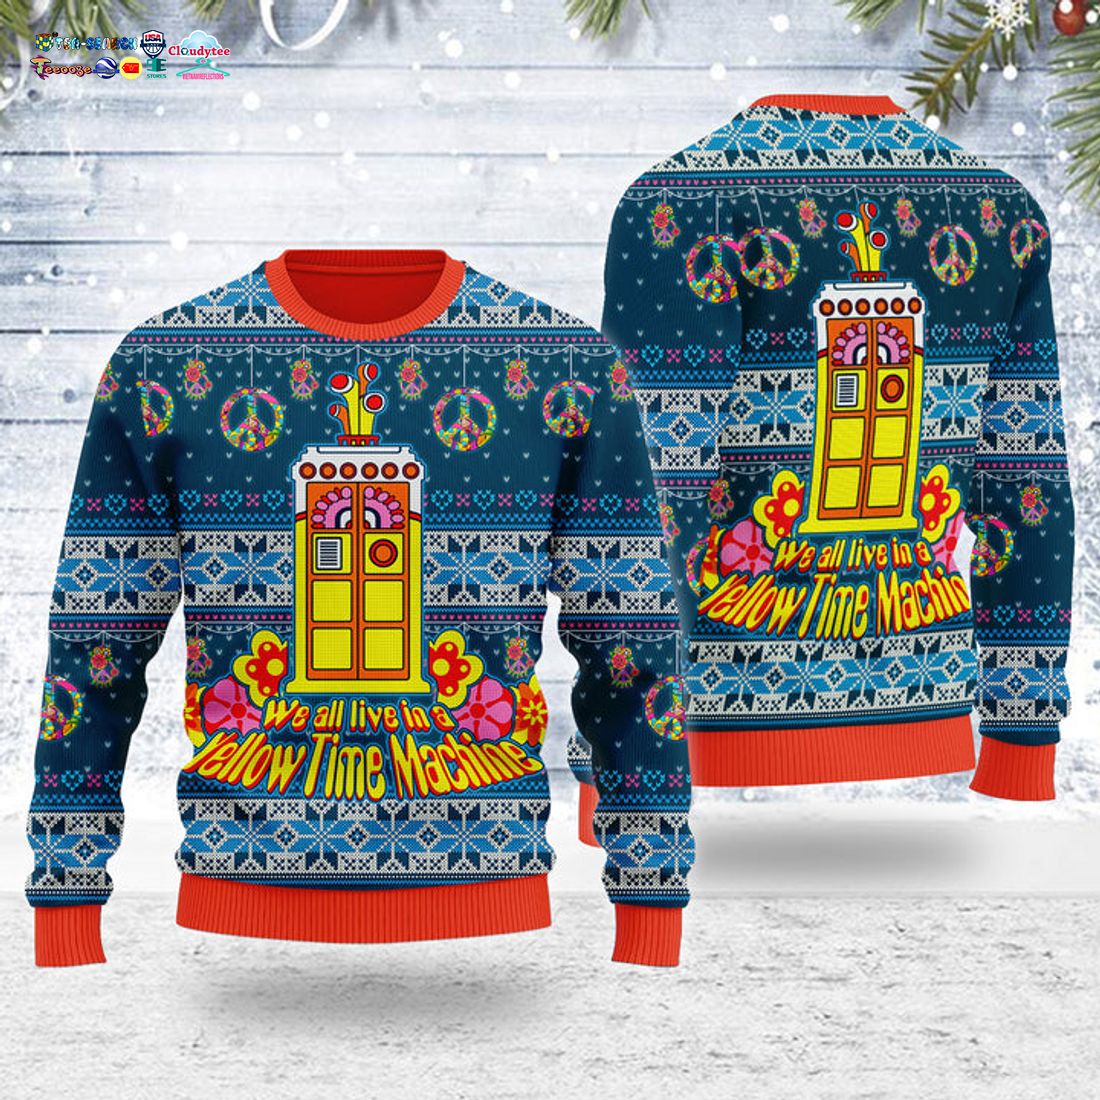 we-all-live-in-a-yellow-time-machine-ugly-christmas-sweater-1-T3bjV.jpg